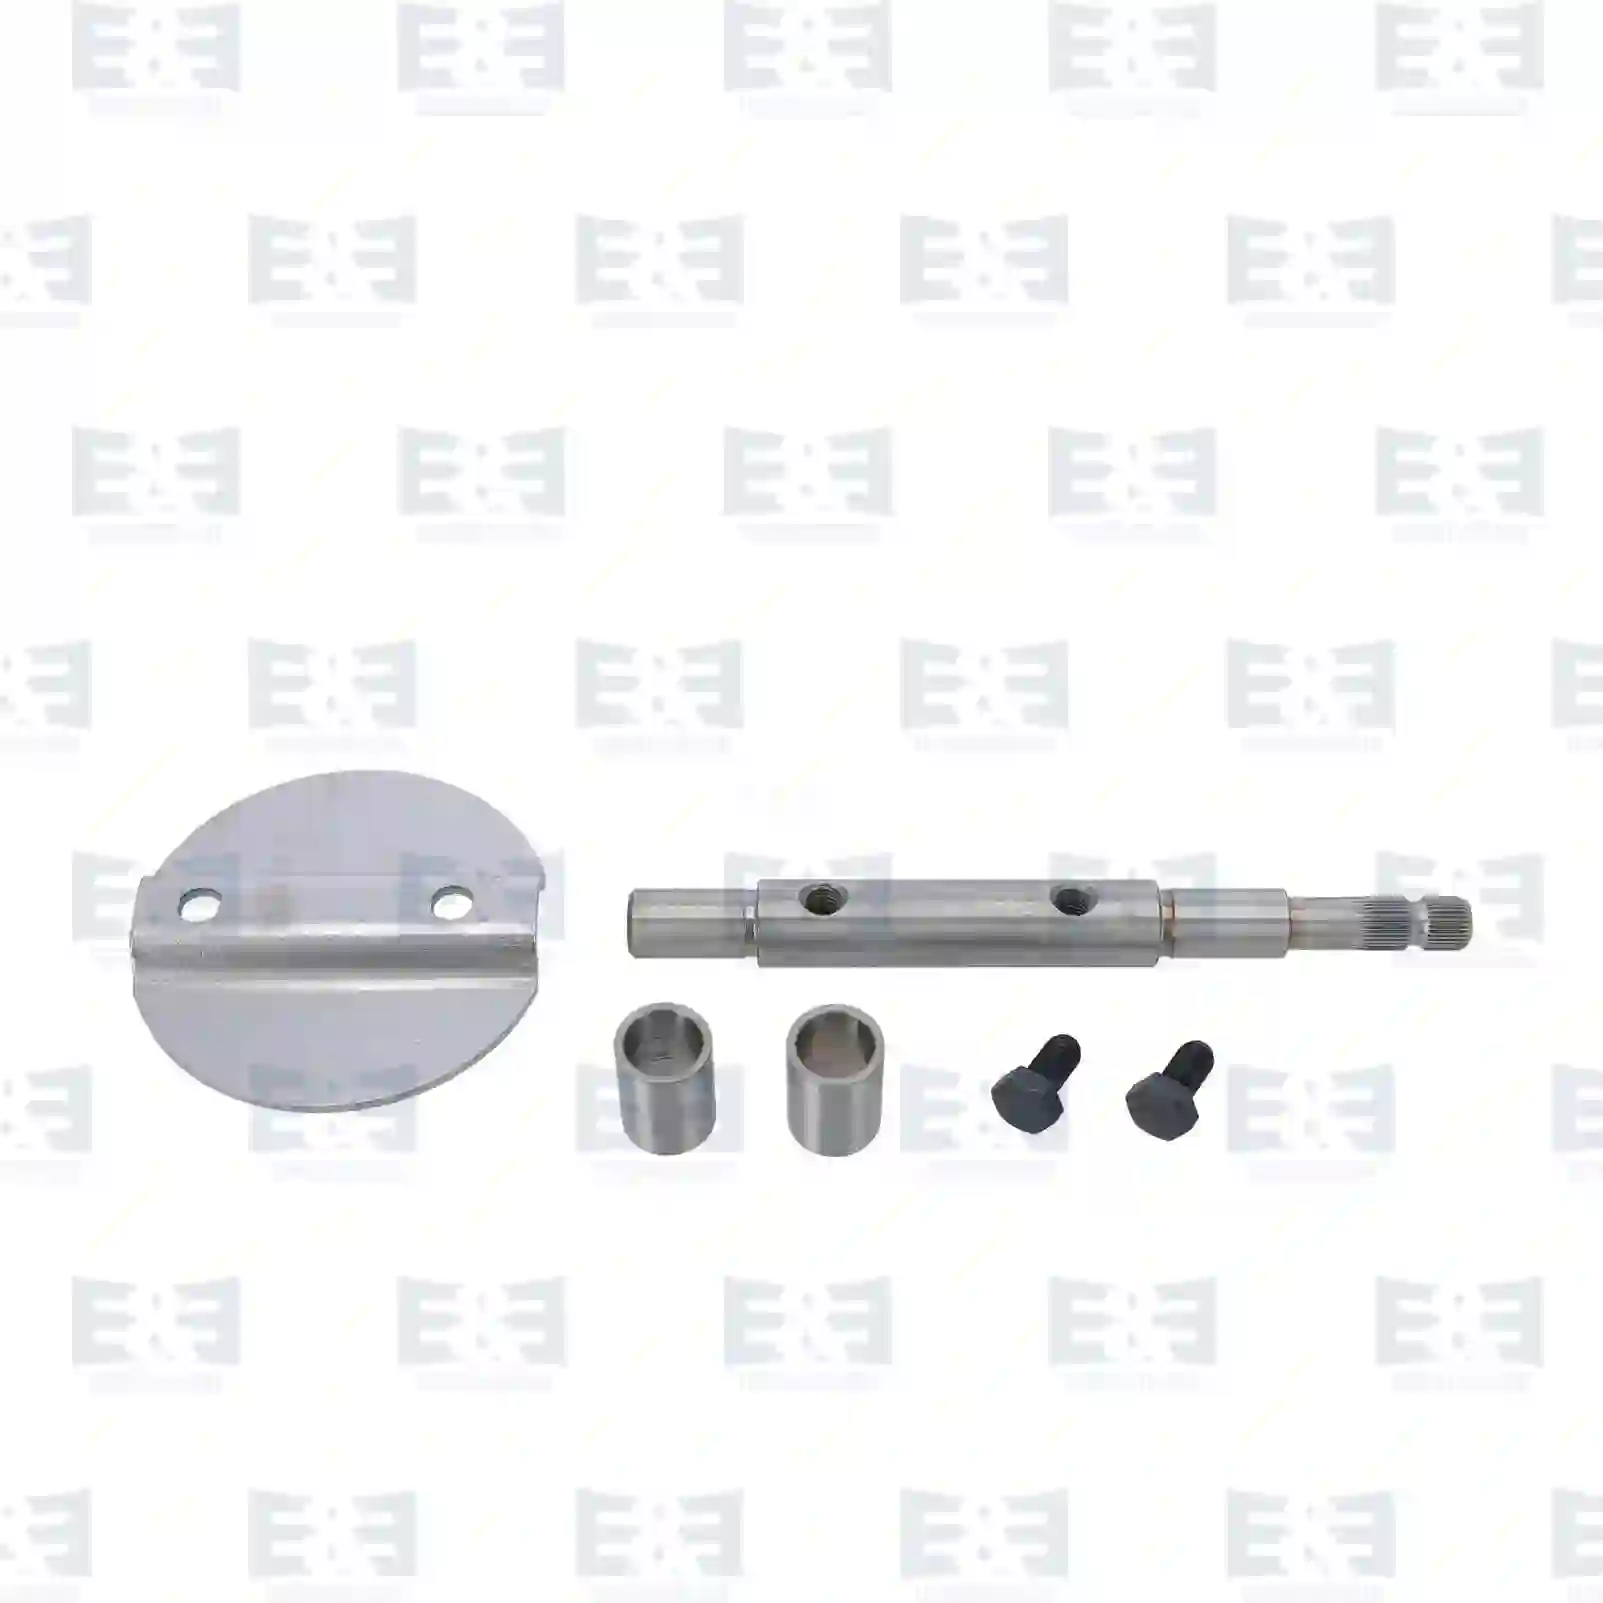 Throttle kit, stainless steel, 2E2208540, 4411400163, 44114 ||  2E2208540 E&E Truck Spare Parts | Truck Spare Parts, Auotomotive Spare Parts Throttle kit, stainless steel, 2E2208540, 4411400163, 44114 ||  2E2208540 E&E Truck Spare Parts | Truck Spare Parts, Auotomotive Spare Parts